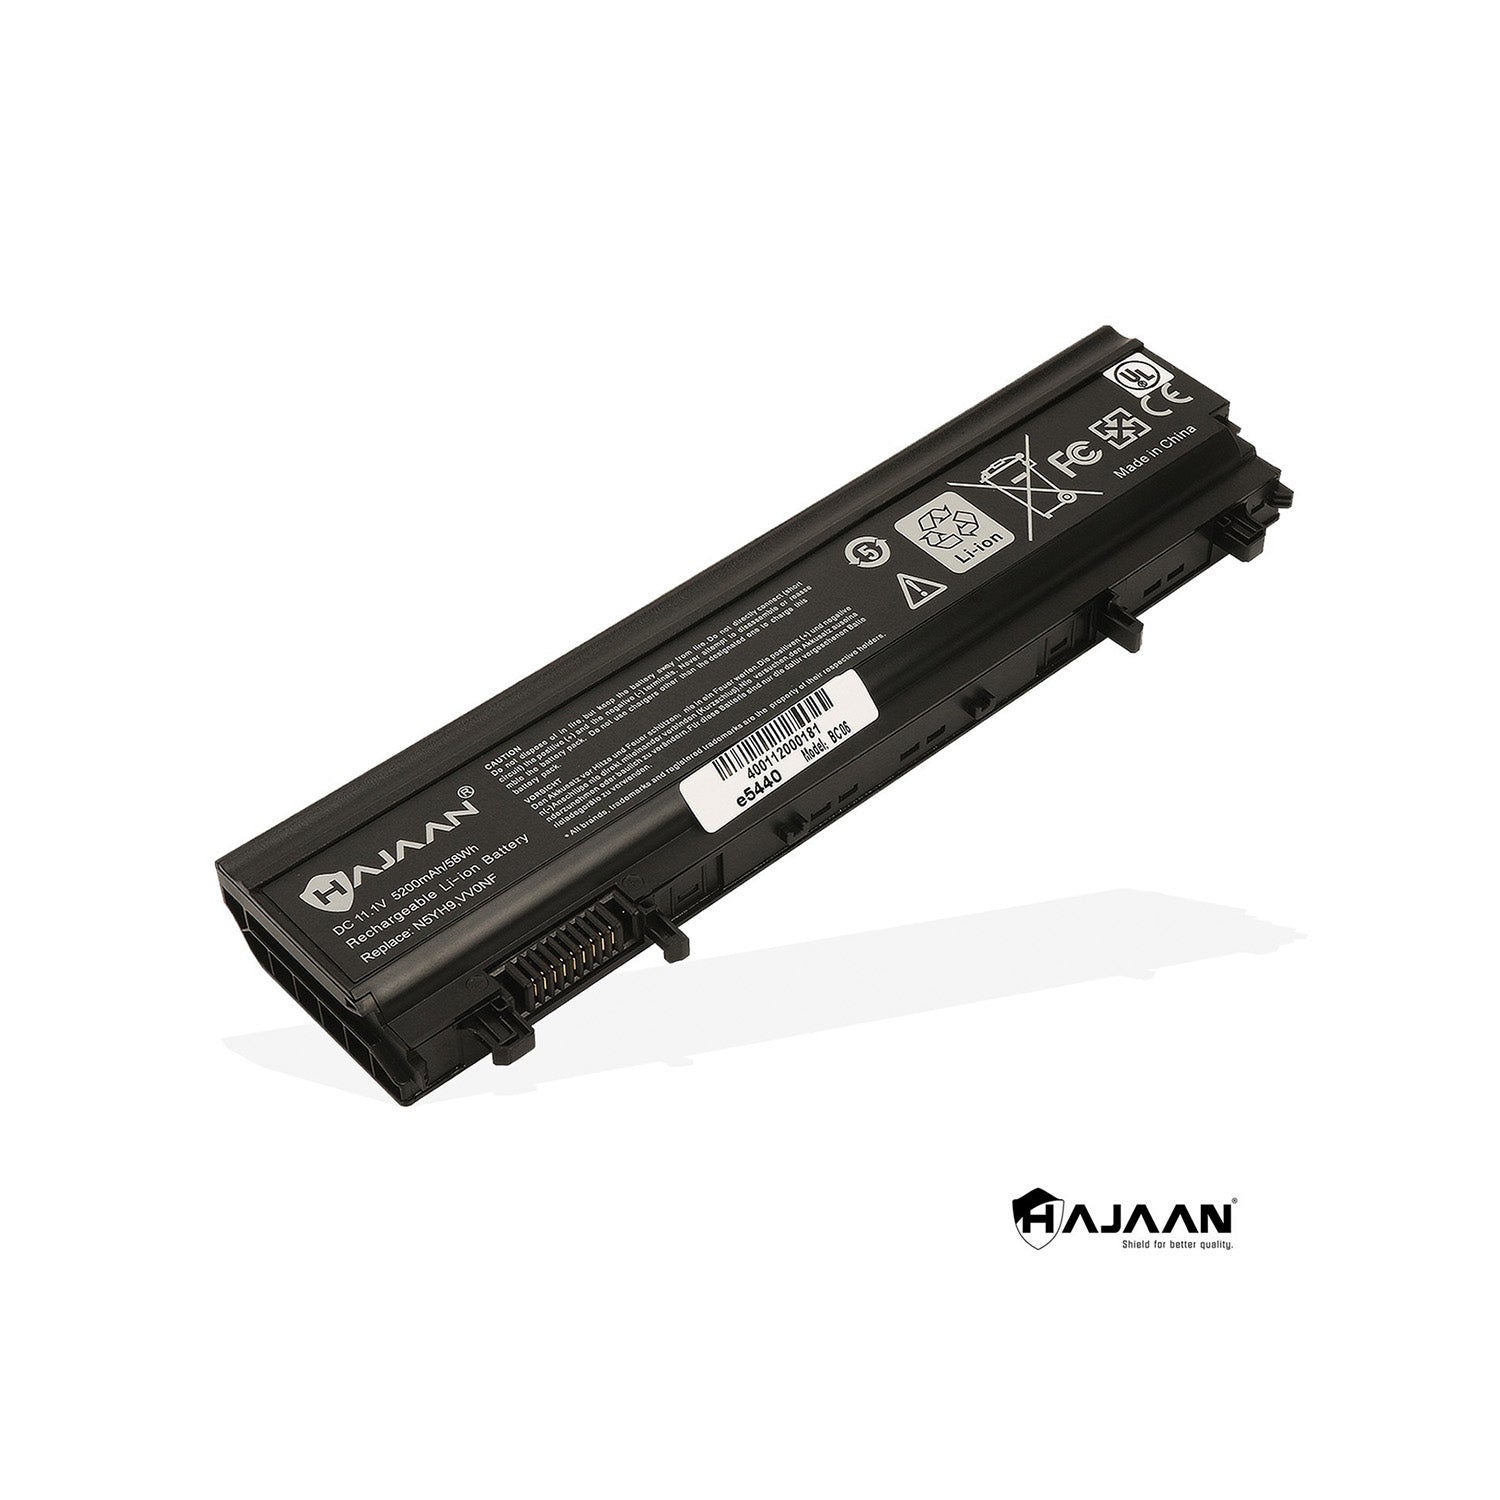 HAJAAN Replacement Laptop Battery for DELL Latitude E5440 ,E5540, Fit P/N: VVONF, N5YH9 Li-ion(5200mAh/58Wh, 6-Cells,11.1V ), 1 Year Warranty